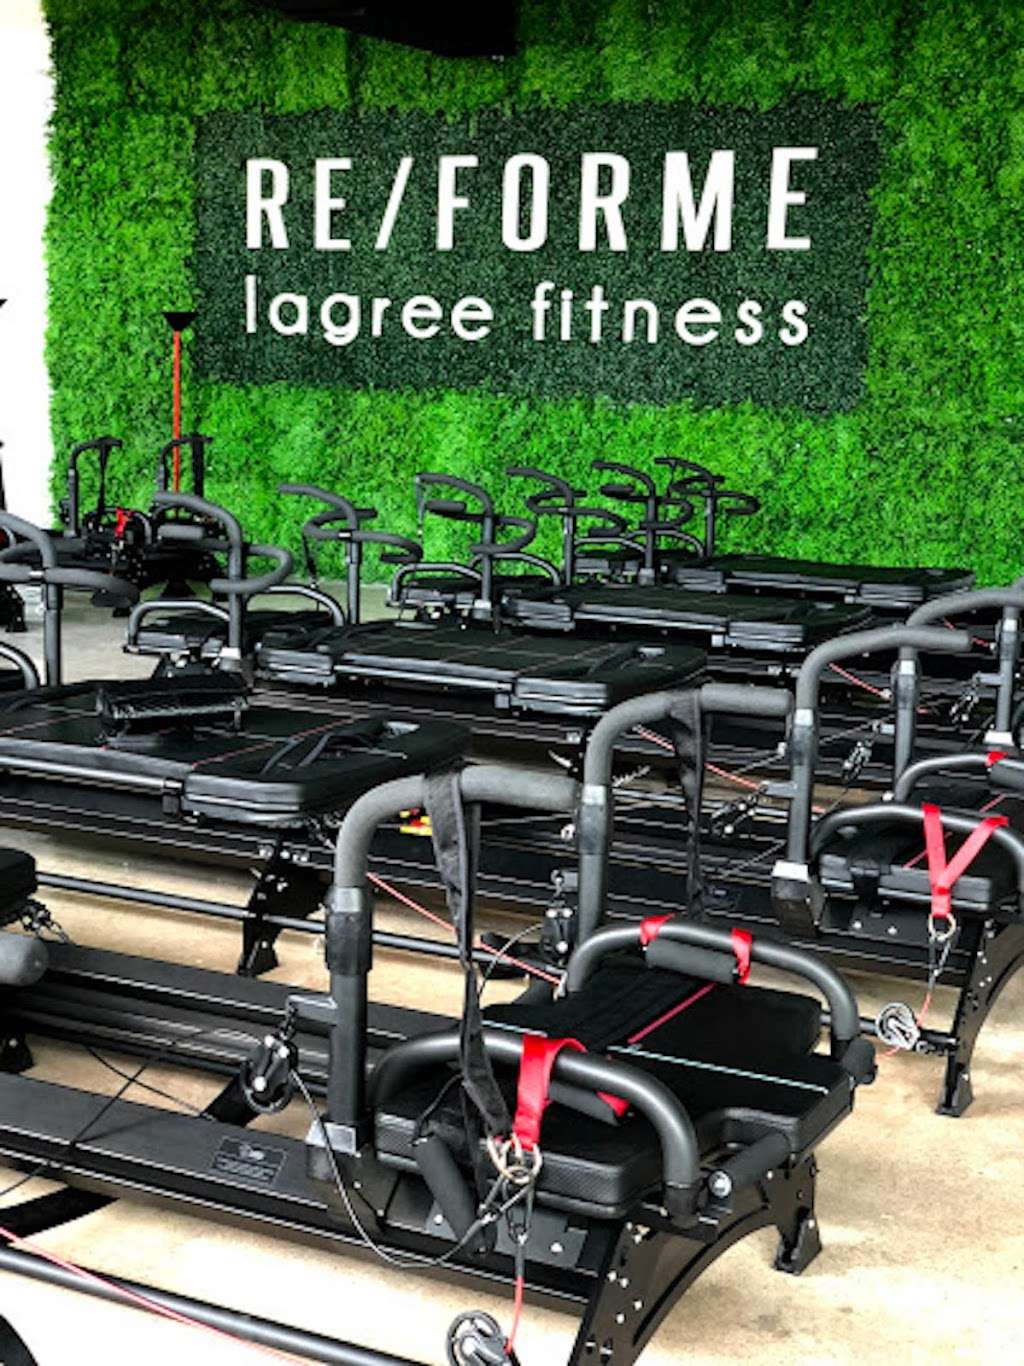 Re/forme lagree fitness | 1737 W 34th St #800, Houston, TX 77018, USA | Phone: (832) 516-0061